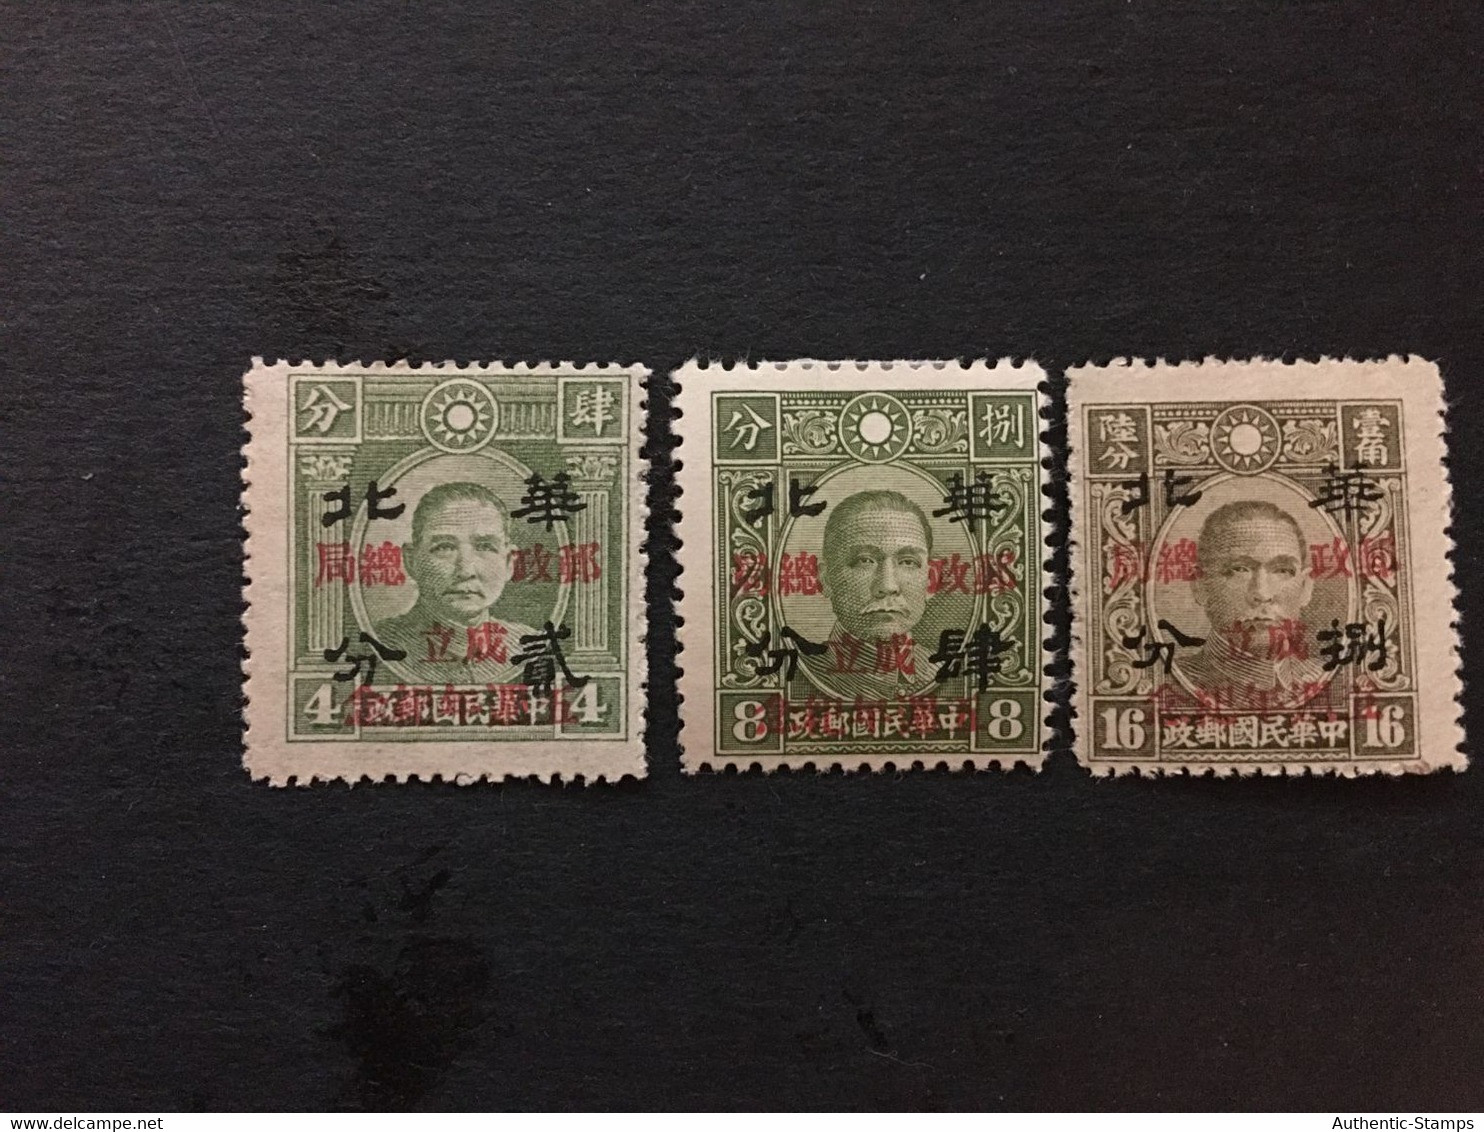 1943 CHINA  STAMP Set,5th Anniversary Of D.G Of Posts, Rare Overprint, Japanese Occupation, MLH, CINA, CHINE,  LIST 1067 - 1941-45 Nordchina